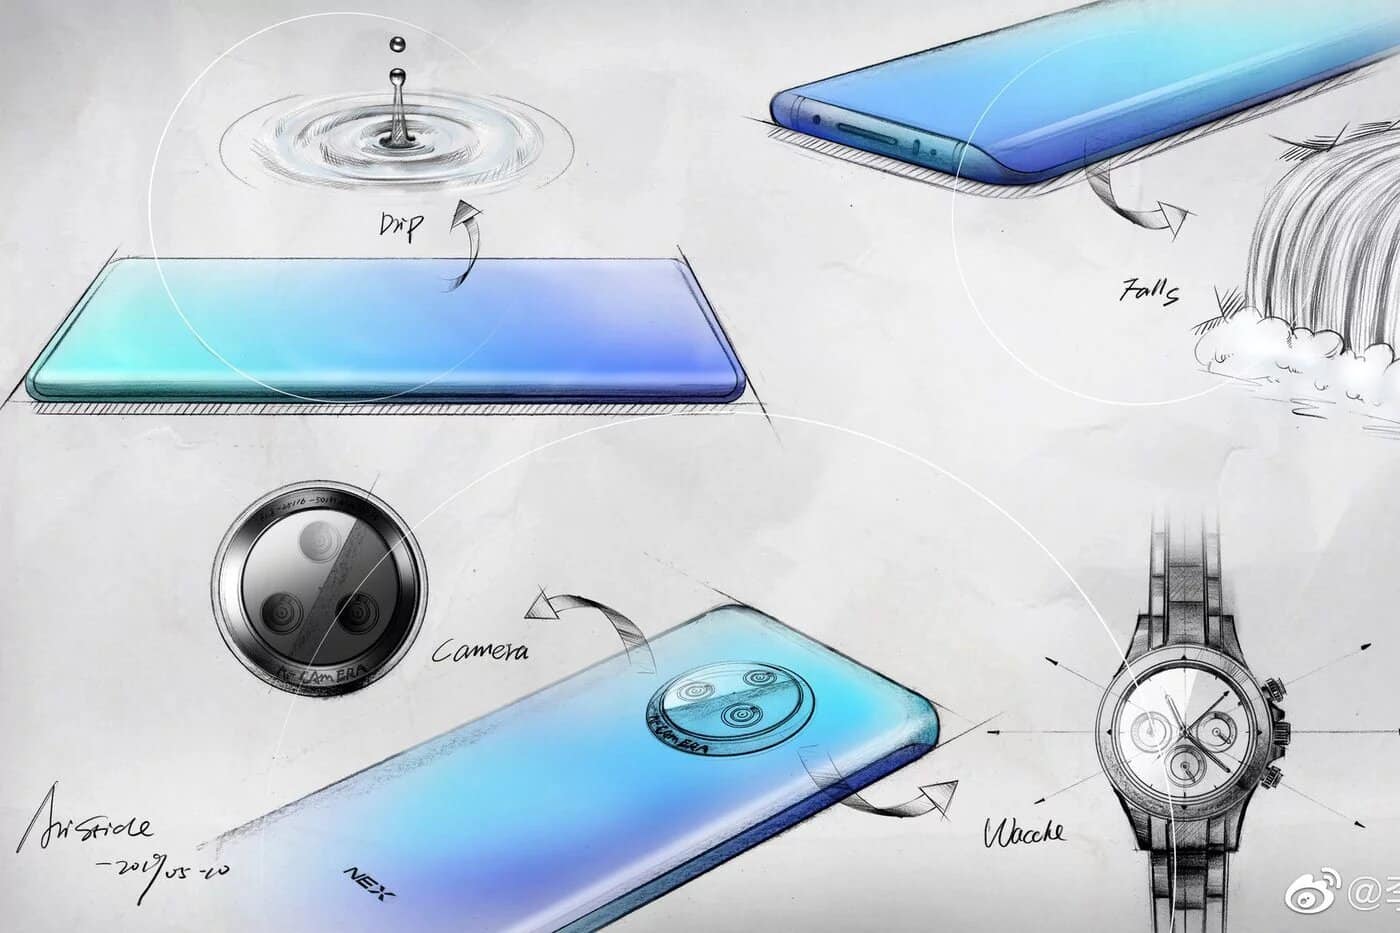 Vivo Product Manager showed sketches of NEX 3 smartphone